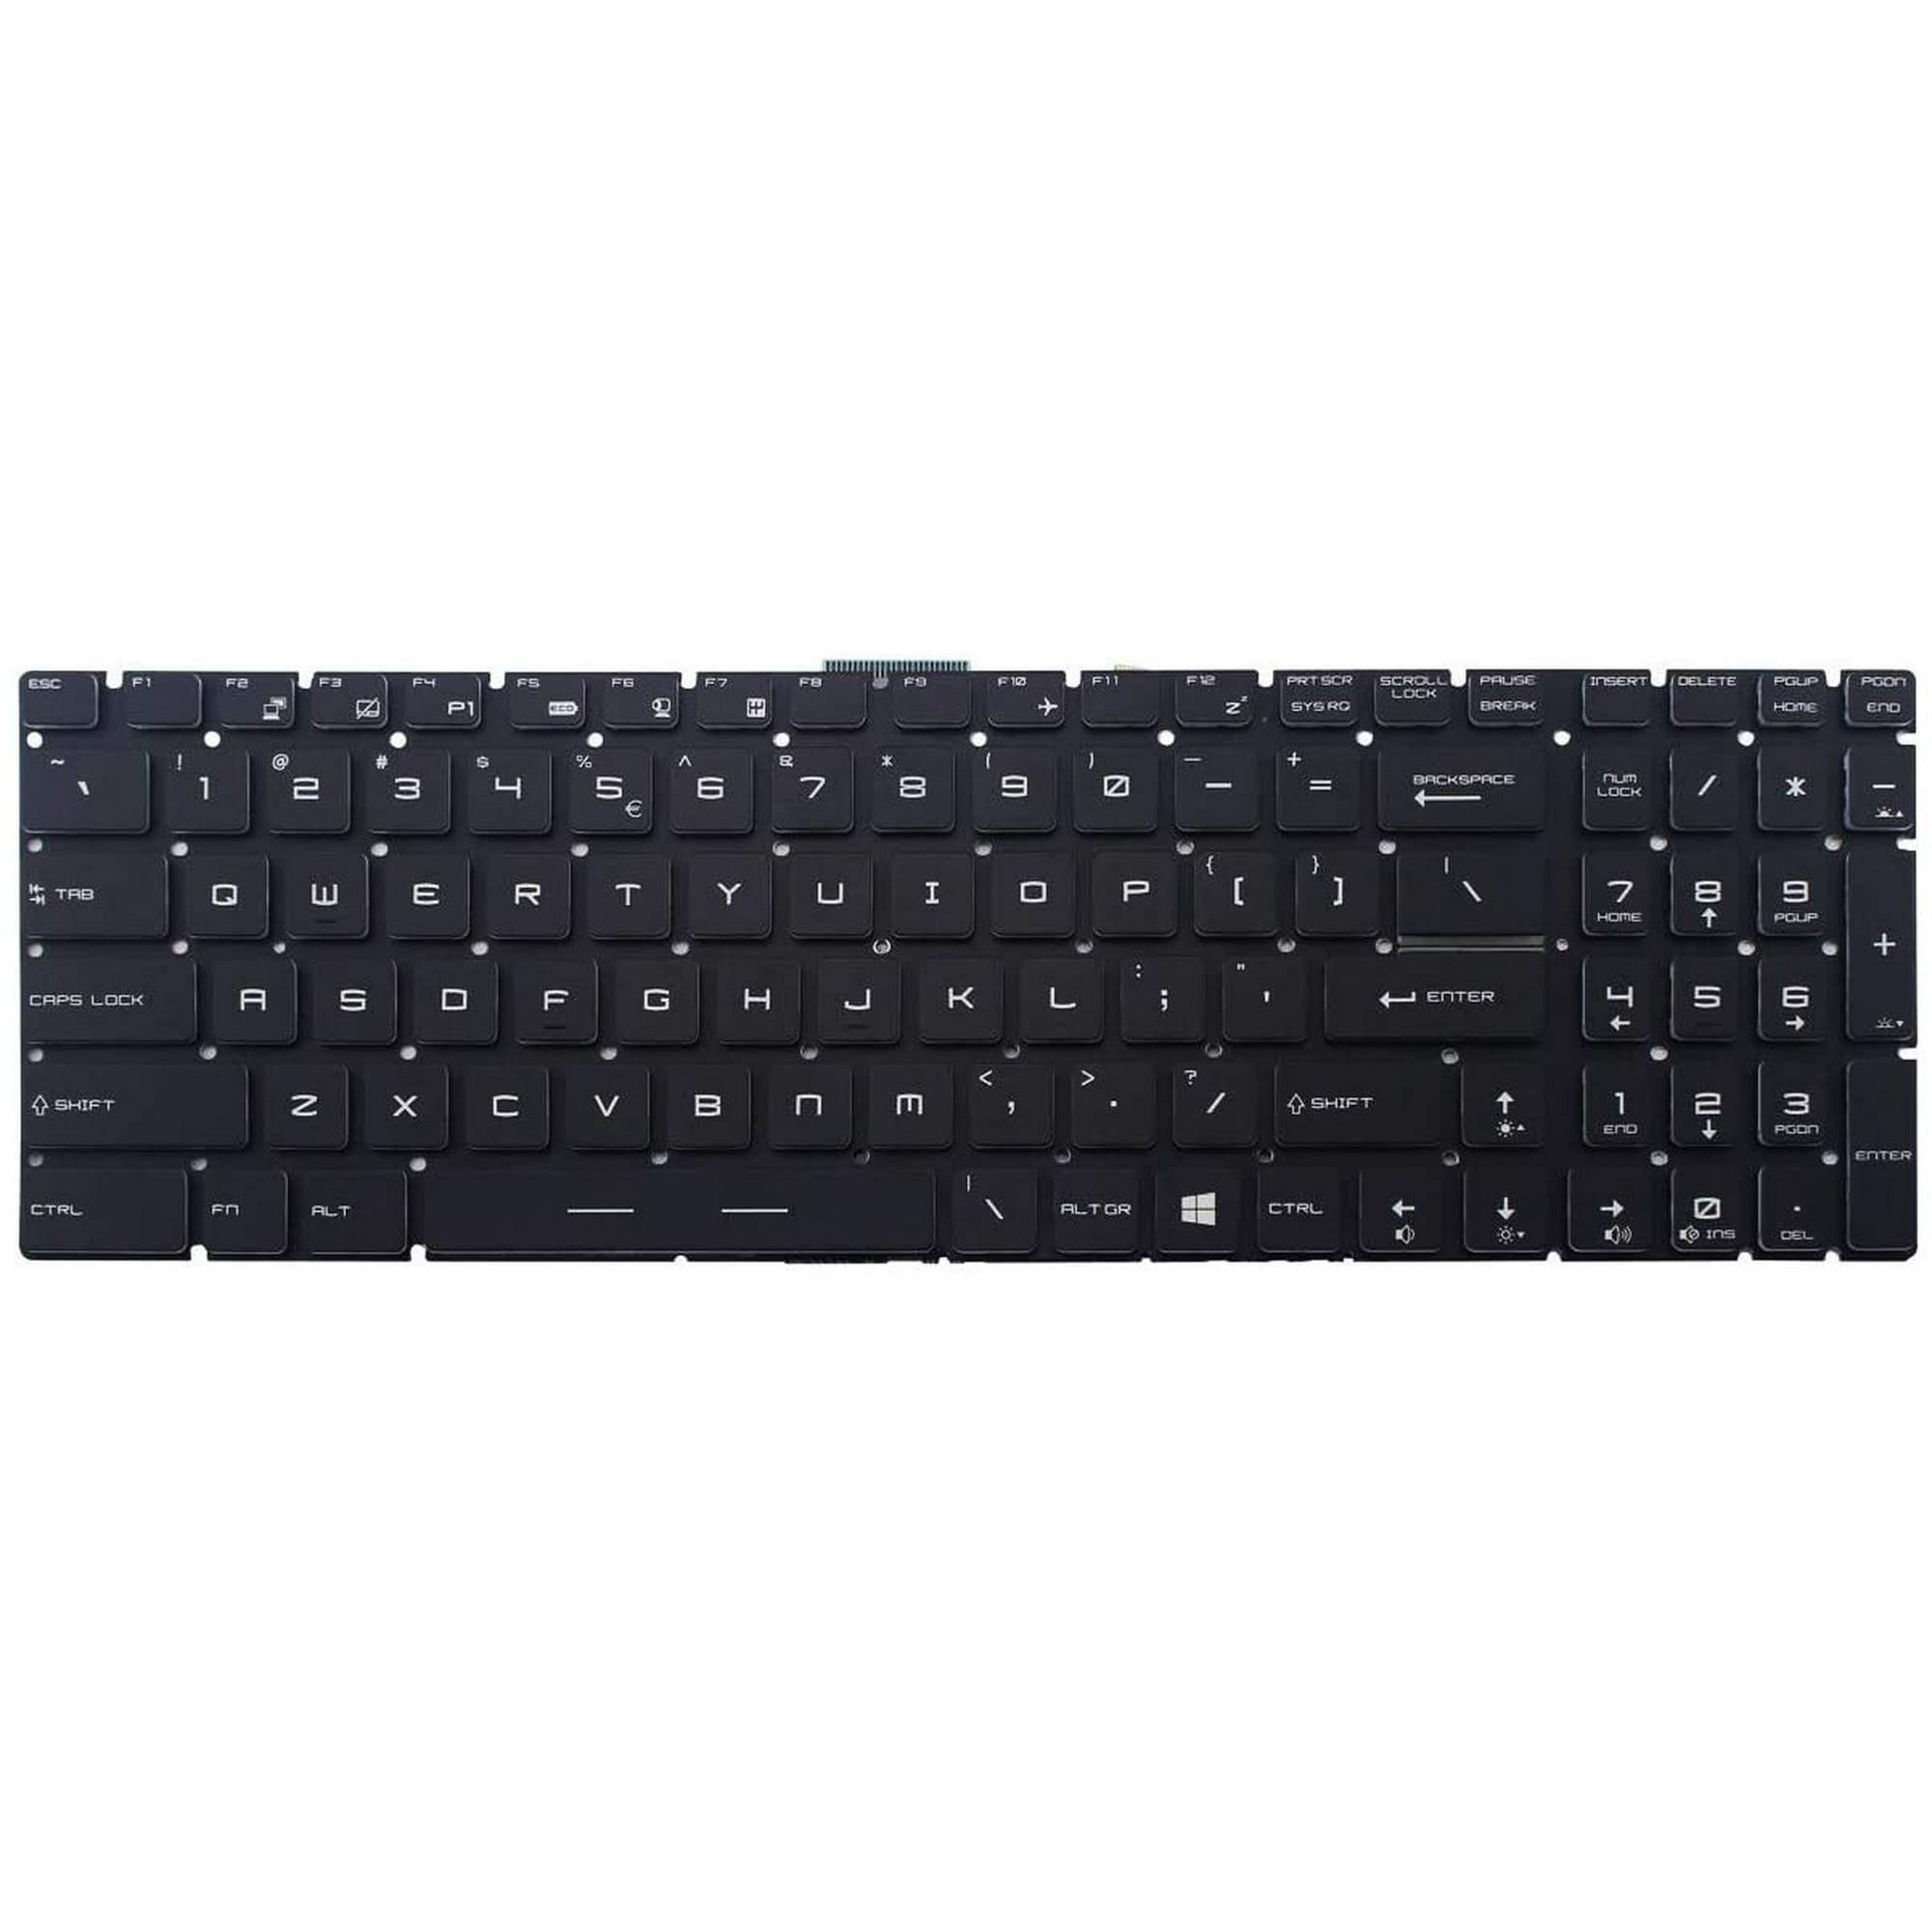 AUTENS Replacement US Colorful Backlight Keyboard for MSI GS60 